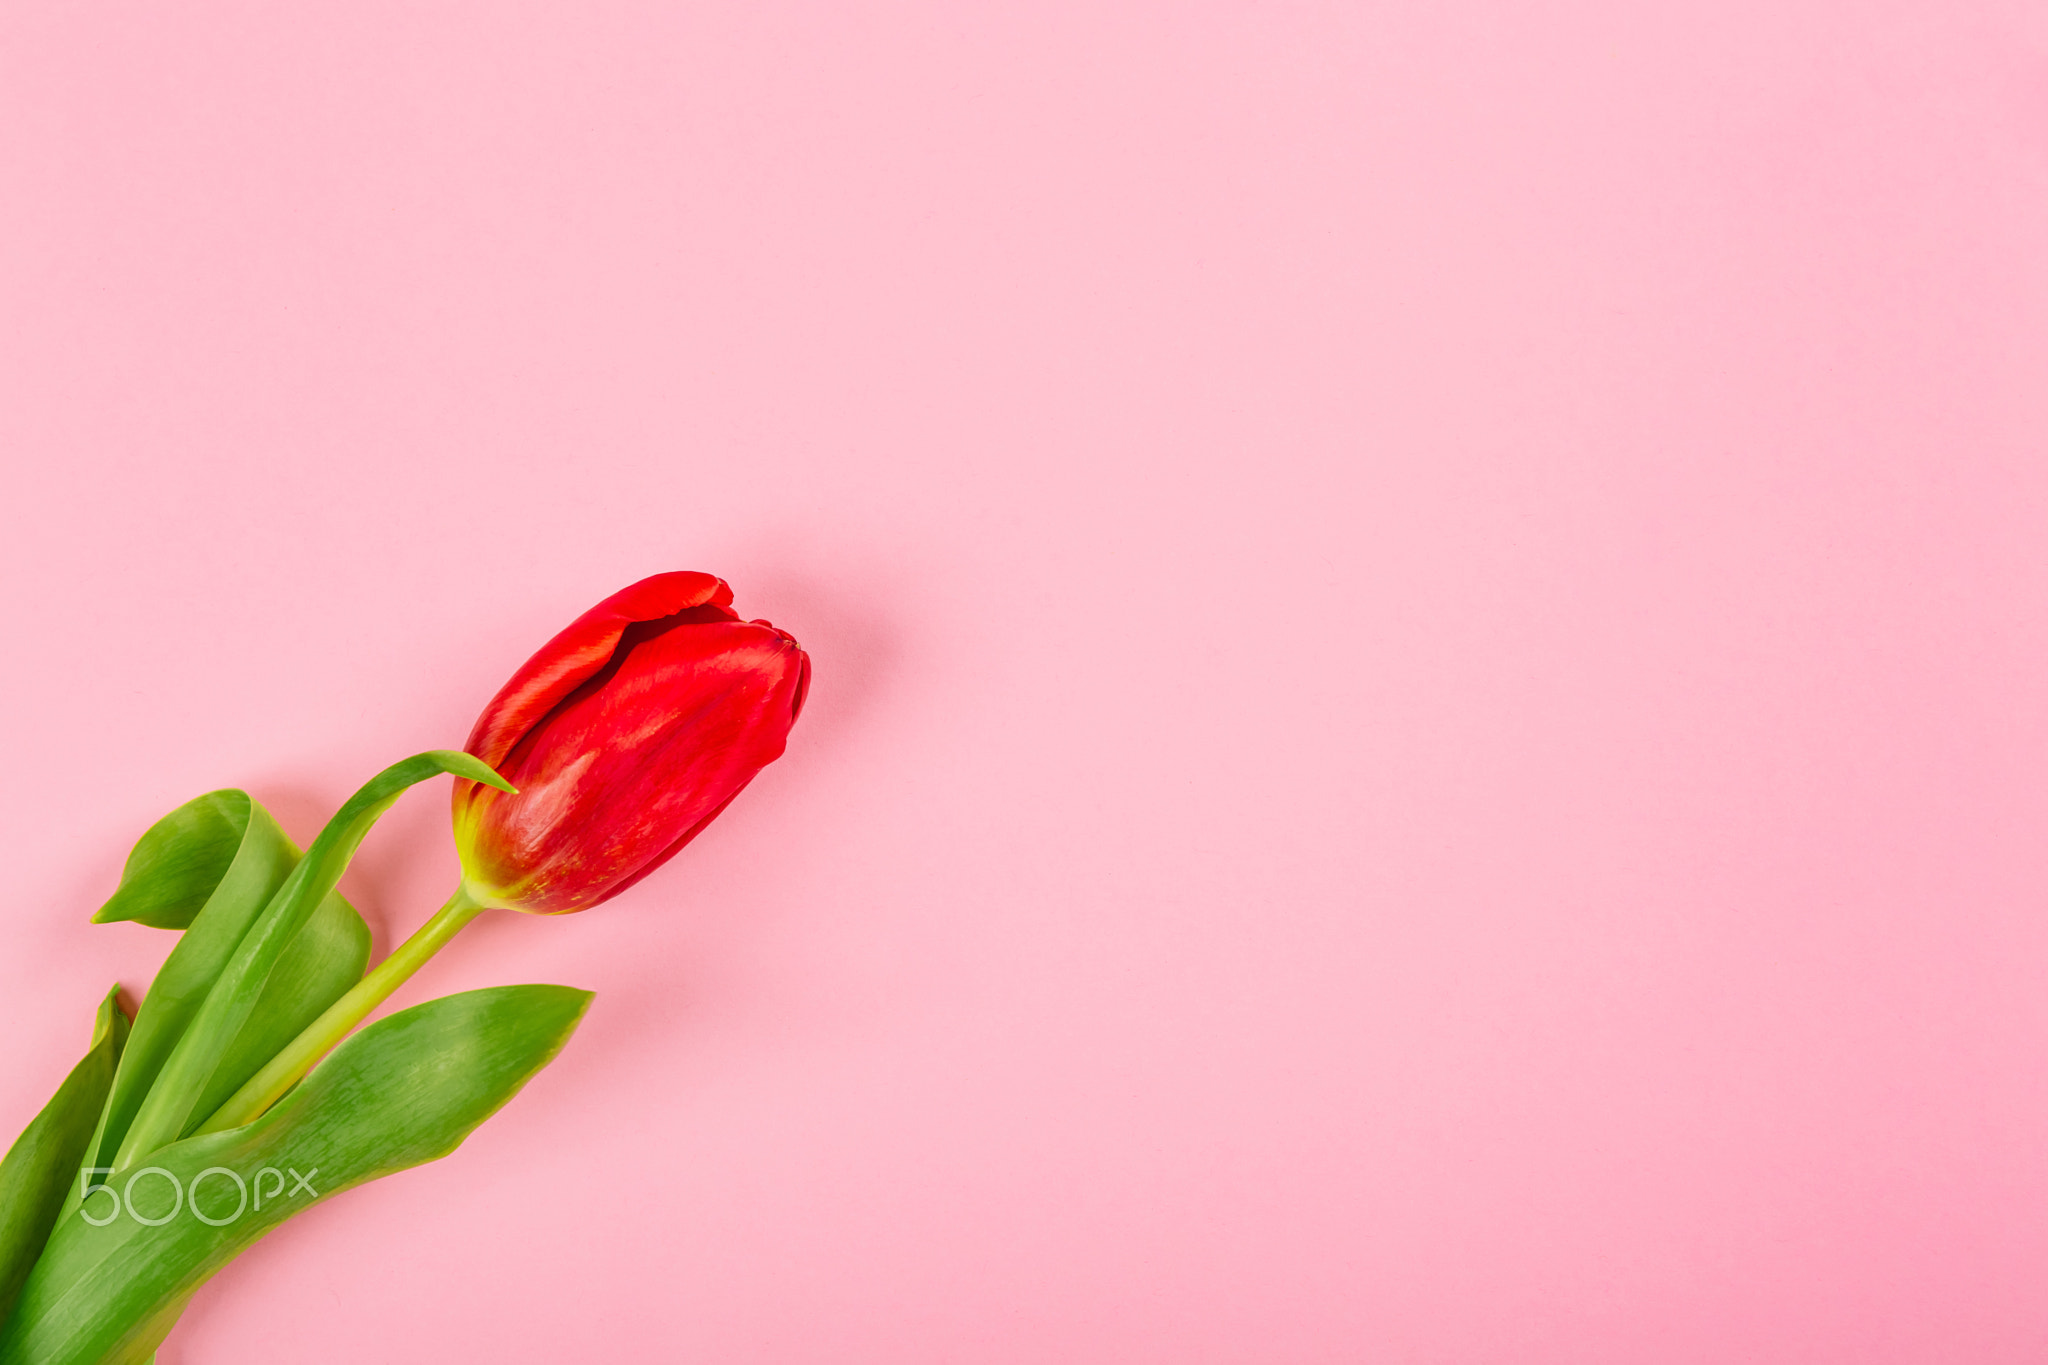 Red tulip bouquet on pink background with copy space, empty text place